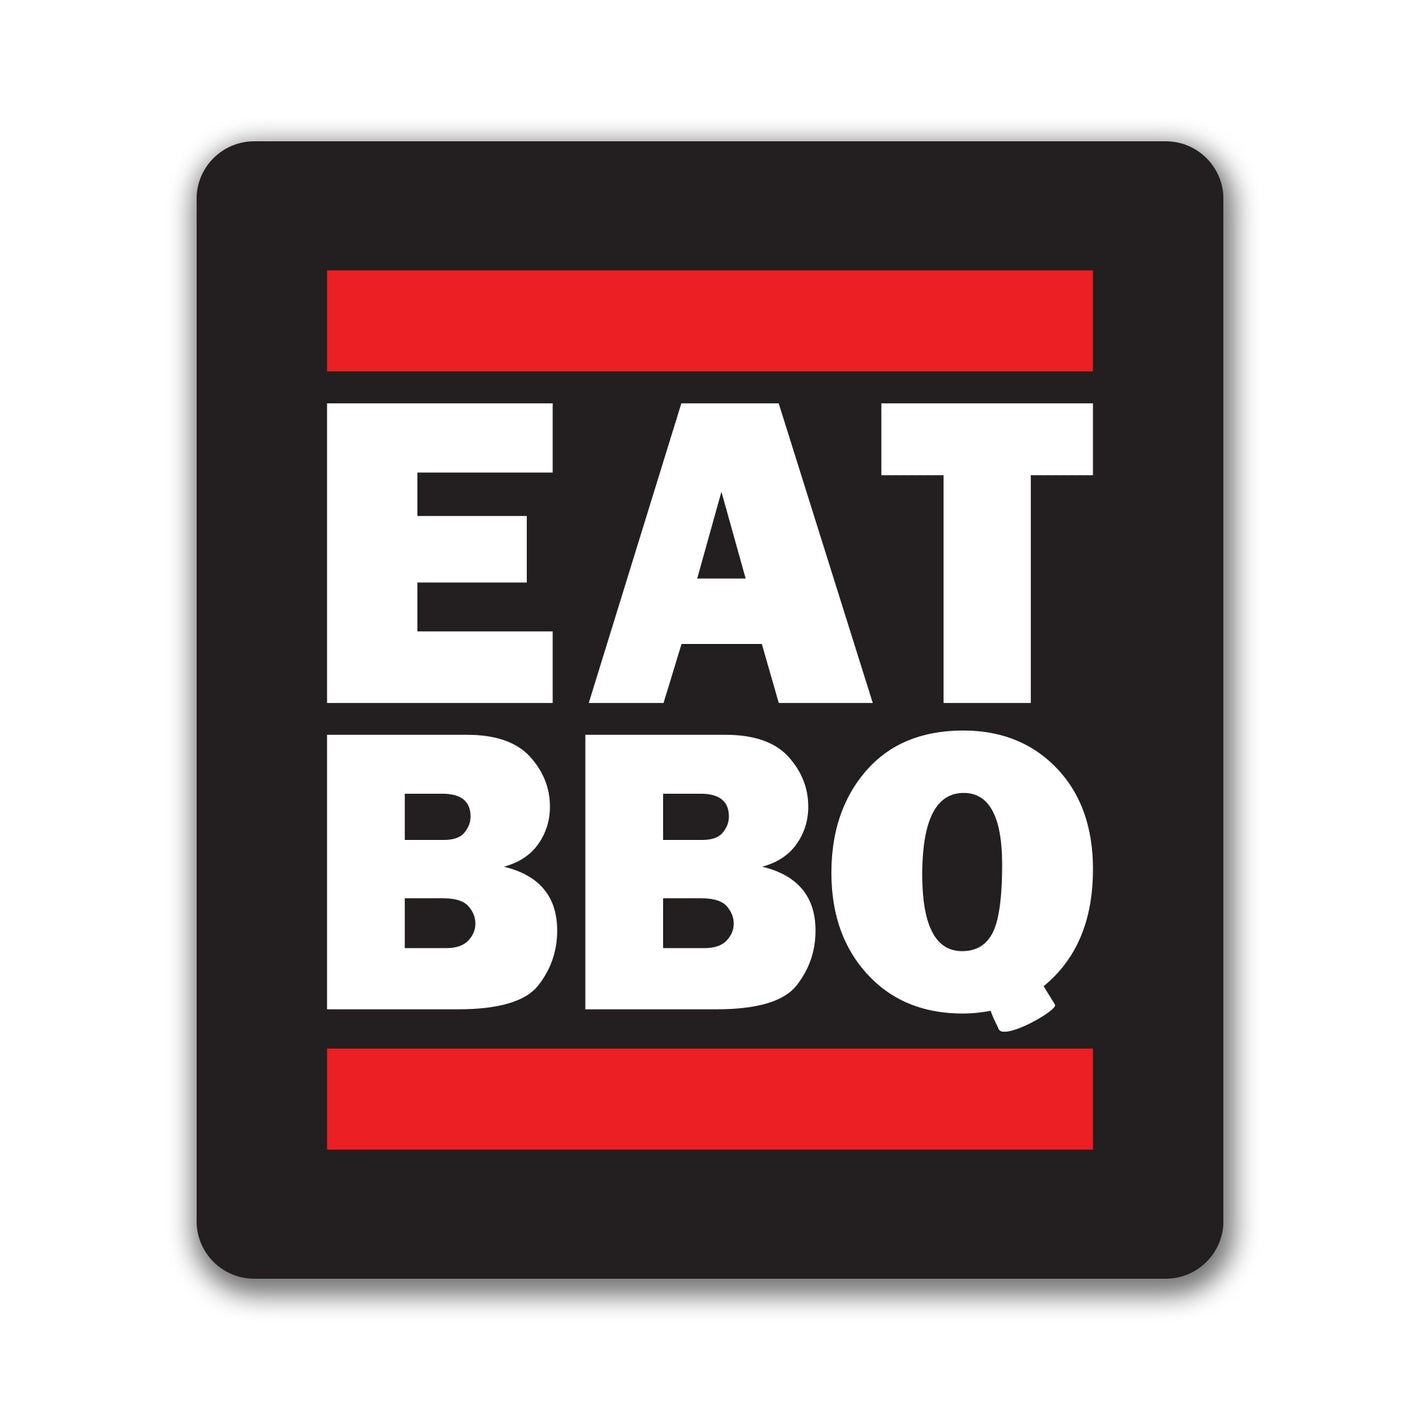 Eat BBQ Decal